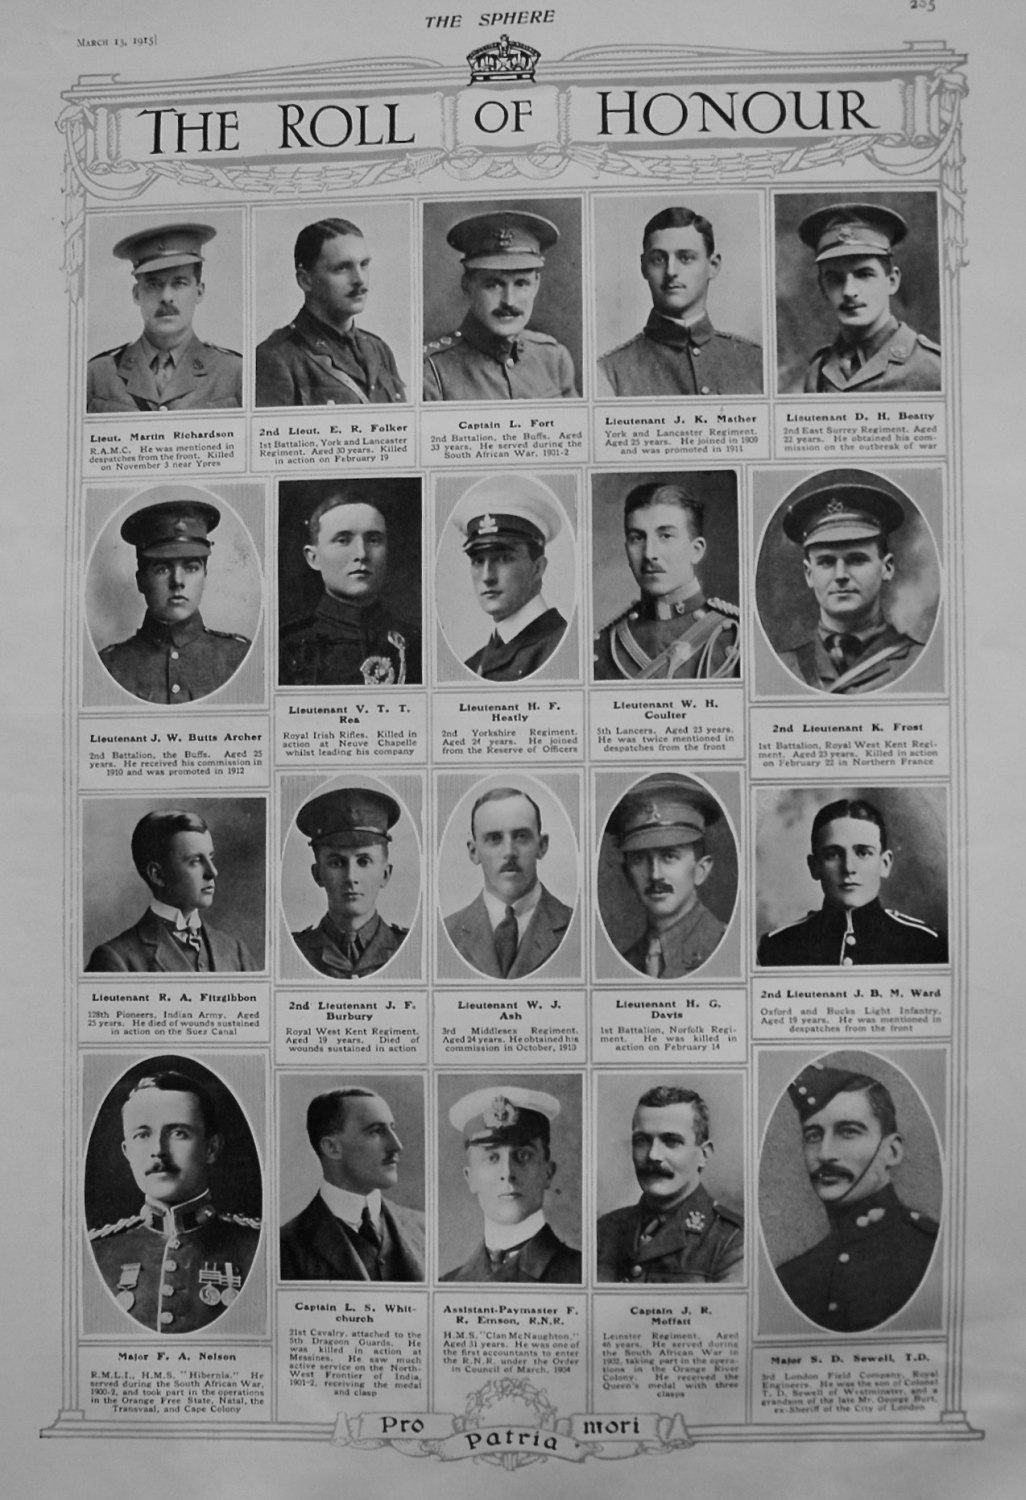 The Roll of Honour. March 13th 1915.